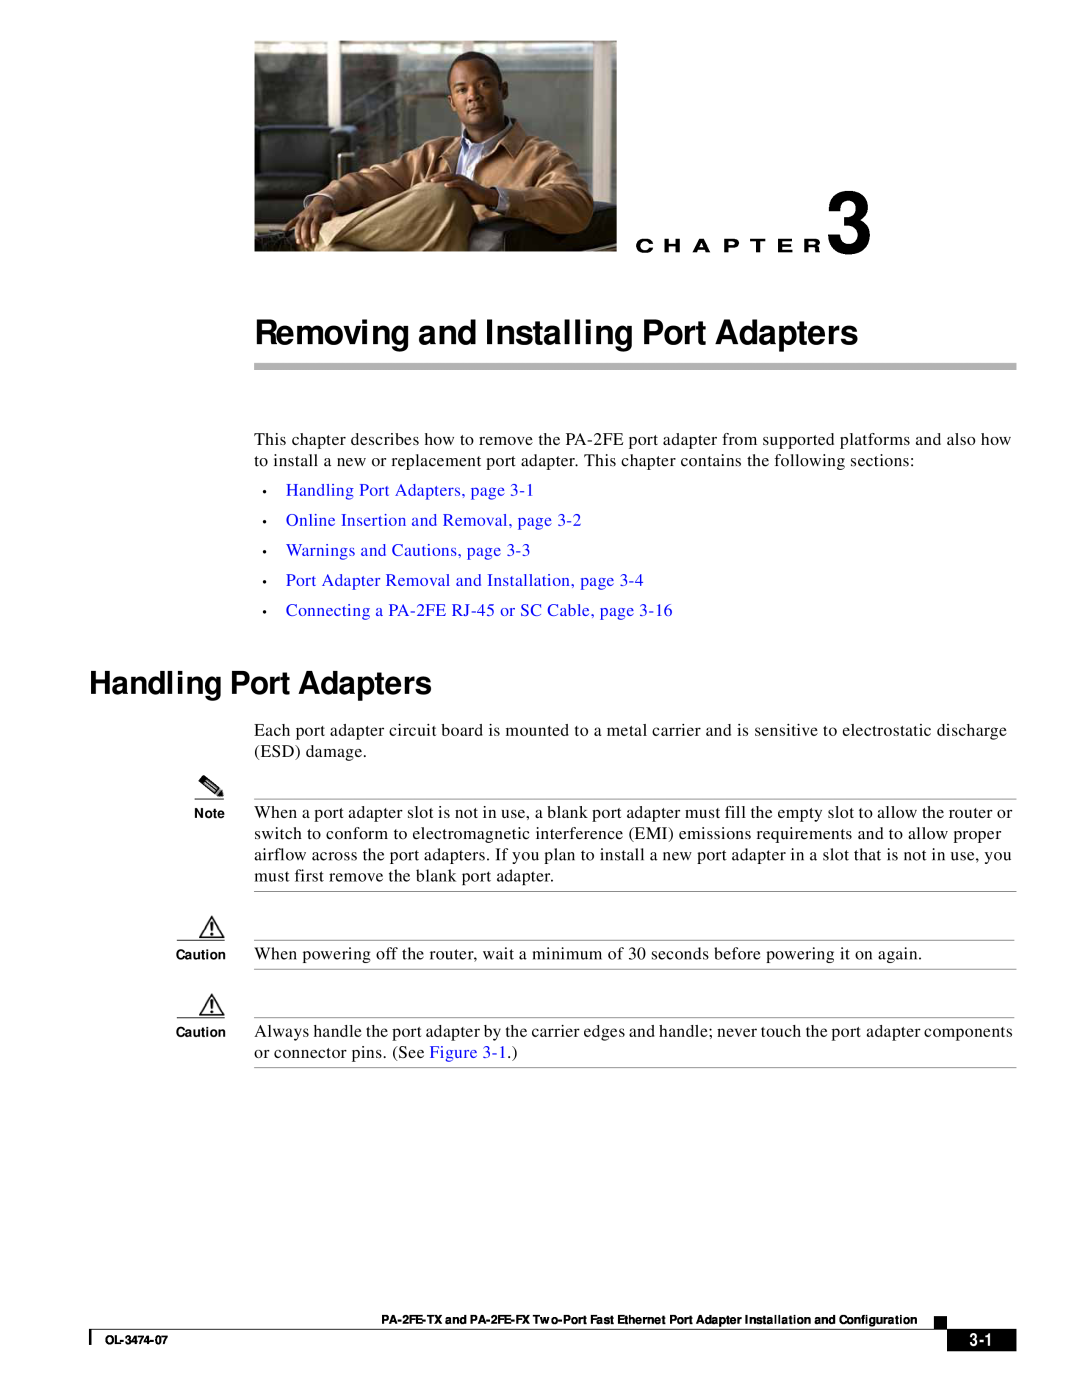 Cisco Systems PA-2FE-FX manual Removing and Installing Port Adapters, Handling Port Adapters, Warnings and Cautions, page 